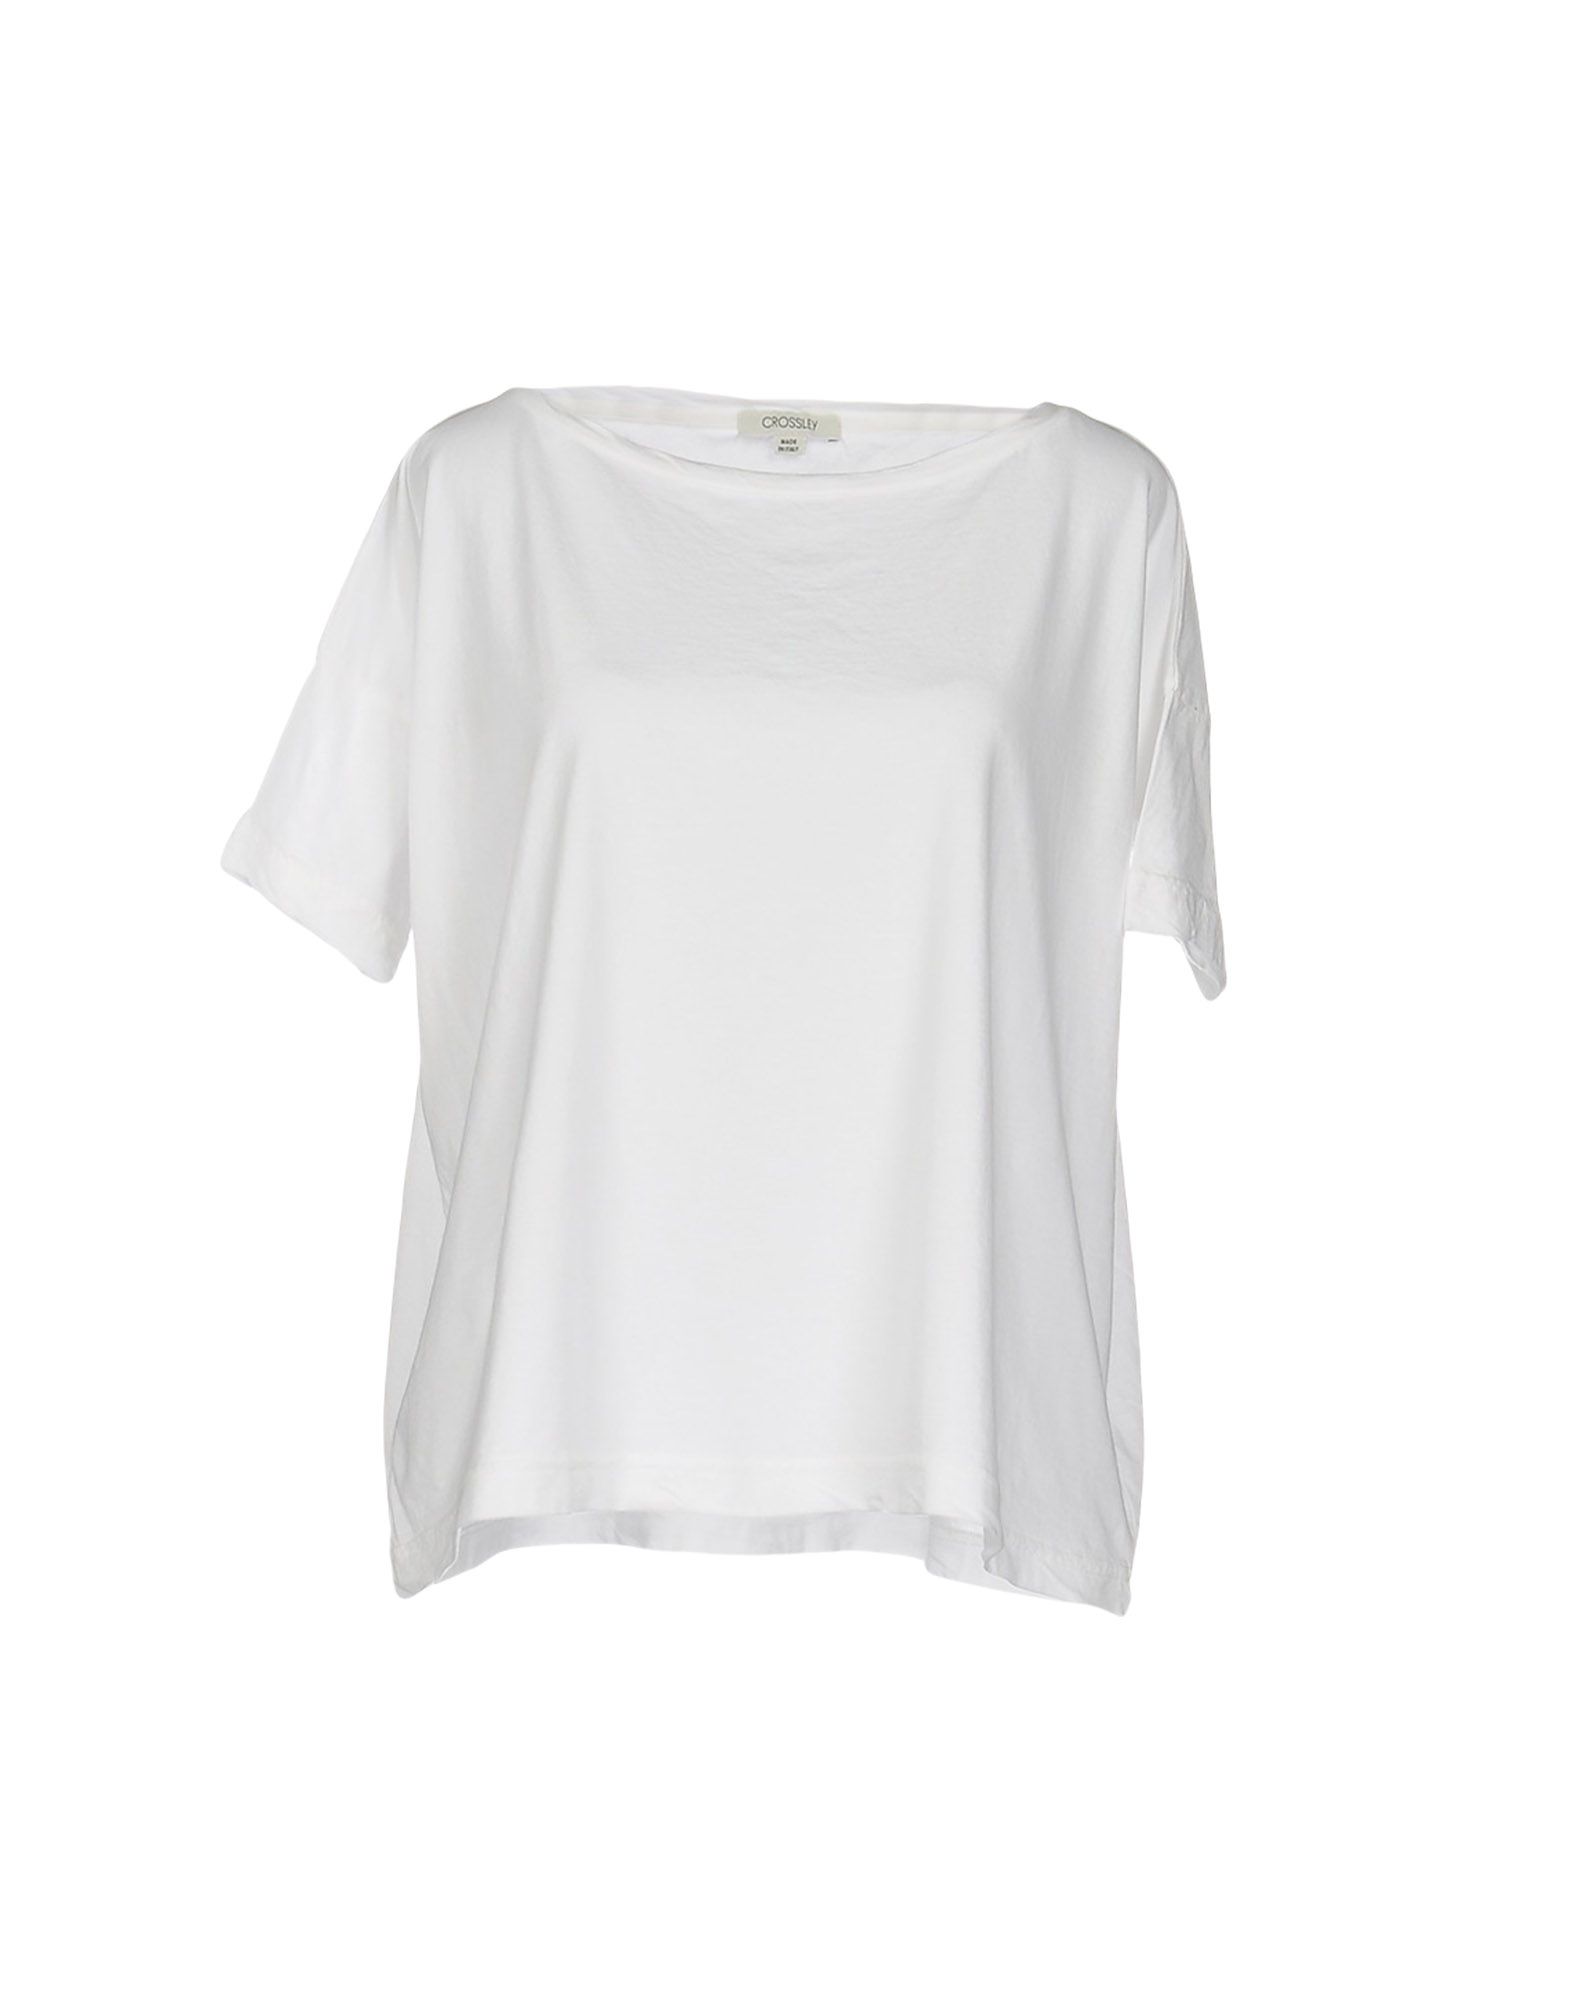 CROSSLEY CROSSLEY WOMAN T-SHIRT WHITE SIZE S COTTON